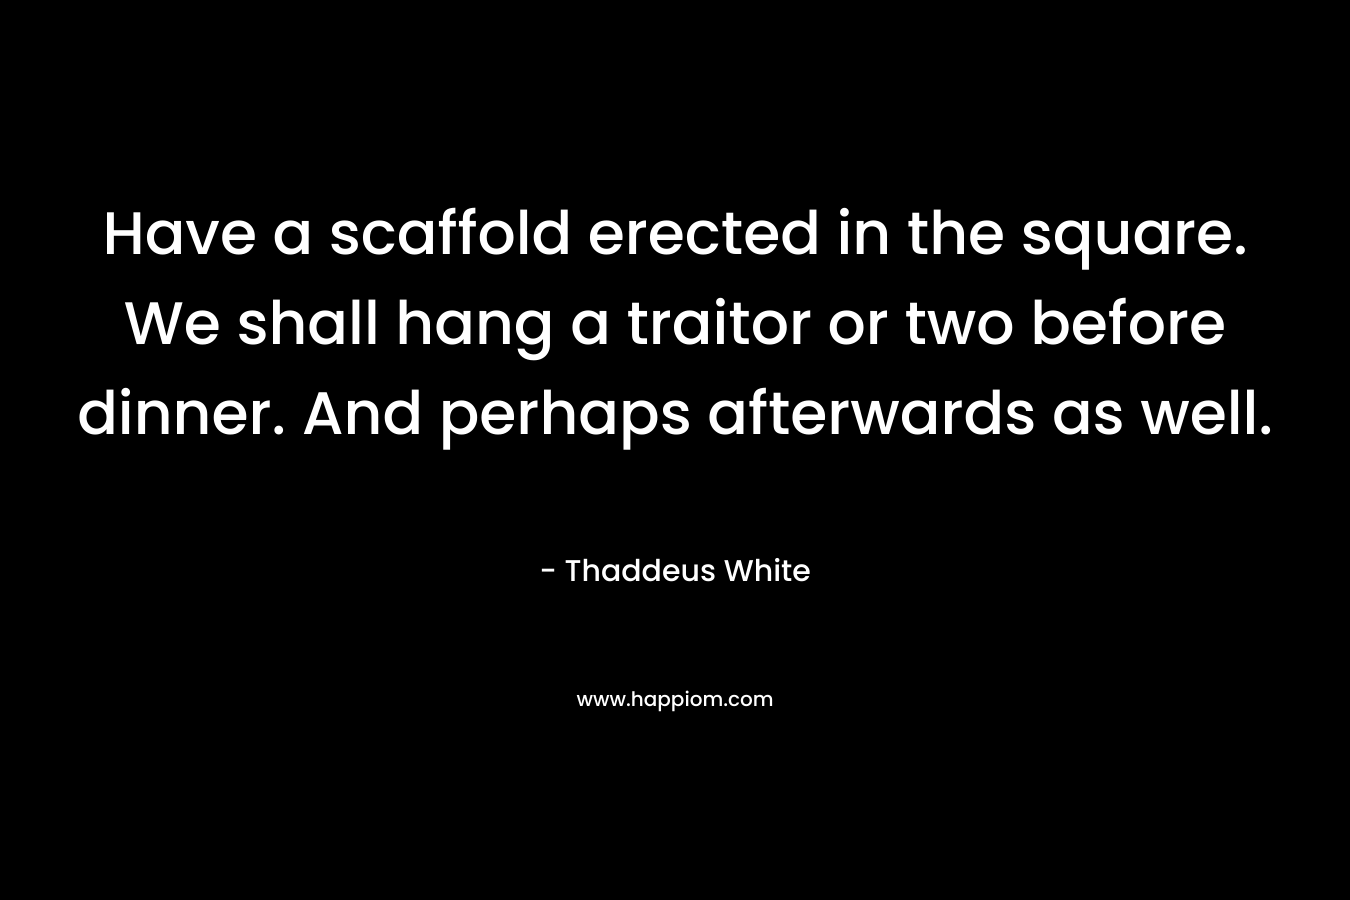 Have a scaffold erected in the square. We shall hang a traitor or two before dinner. And perhaps afterwards as well. – Thaddeus White